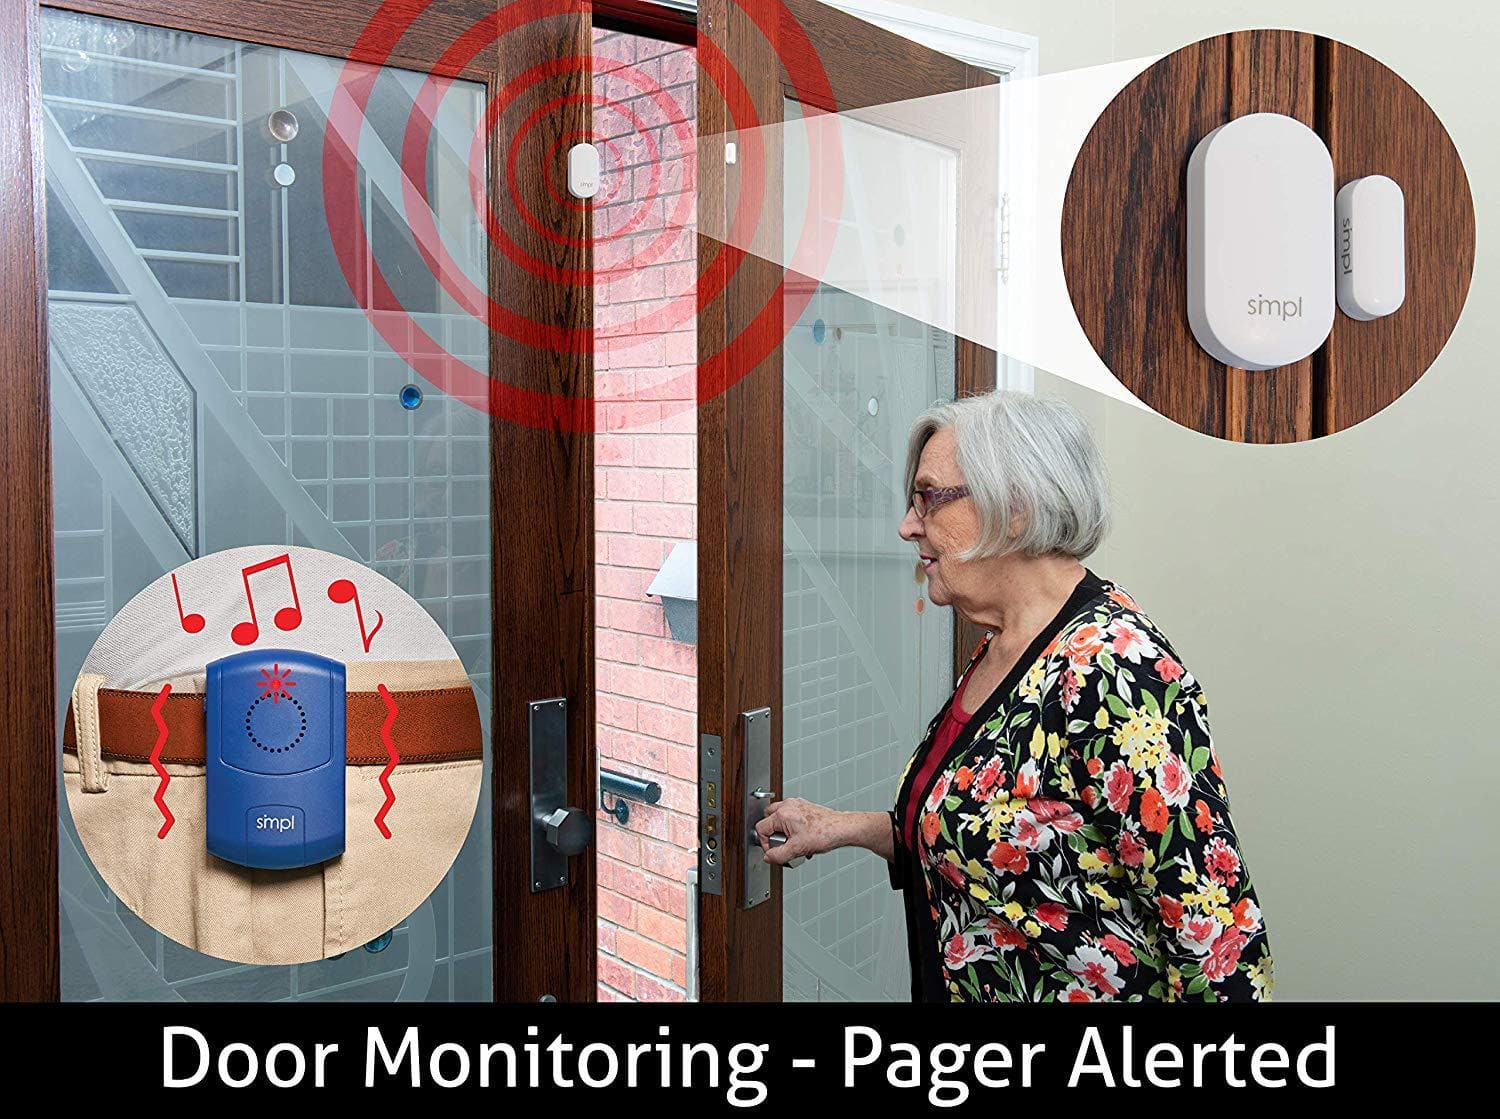 SMPL Alerts Paging Help Alarm System All-in-One 8 Piece Kit - Senior.com Alert Systems